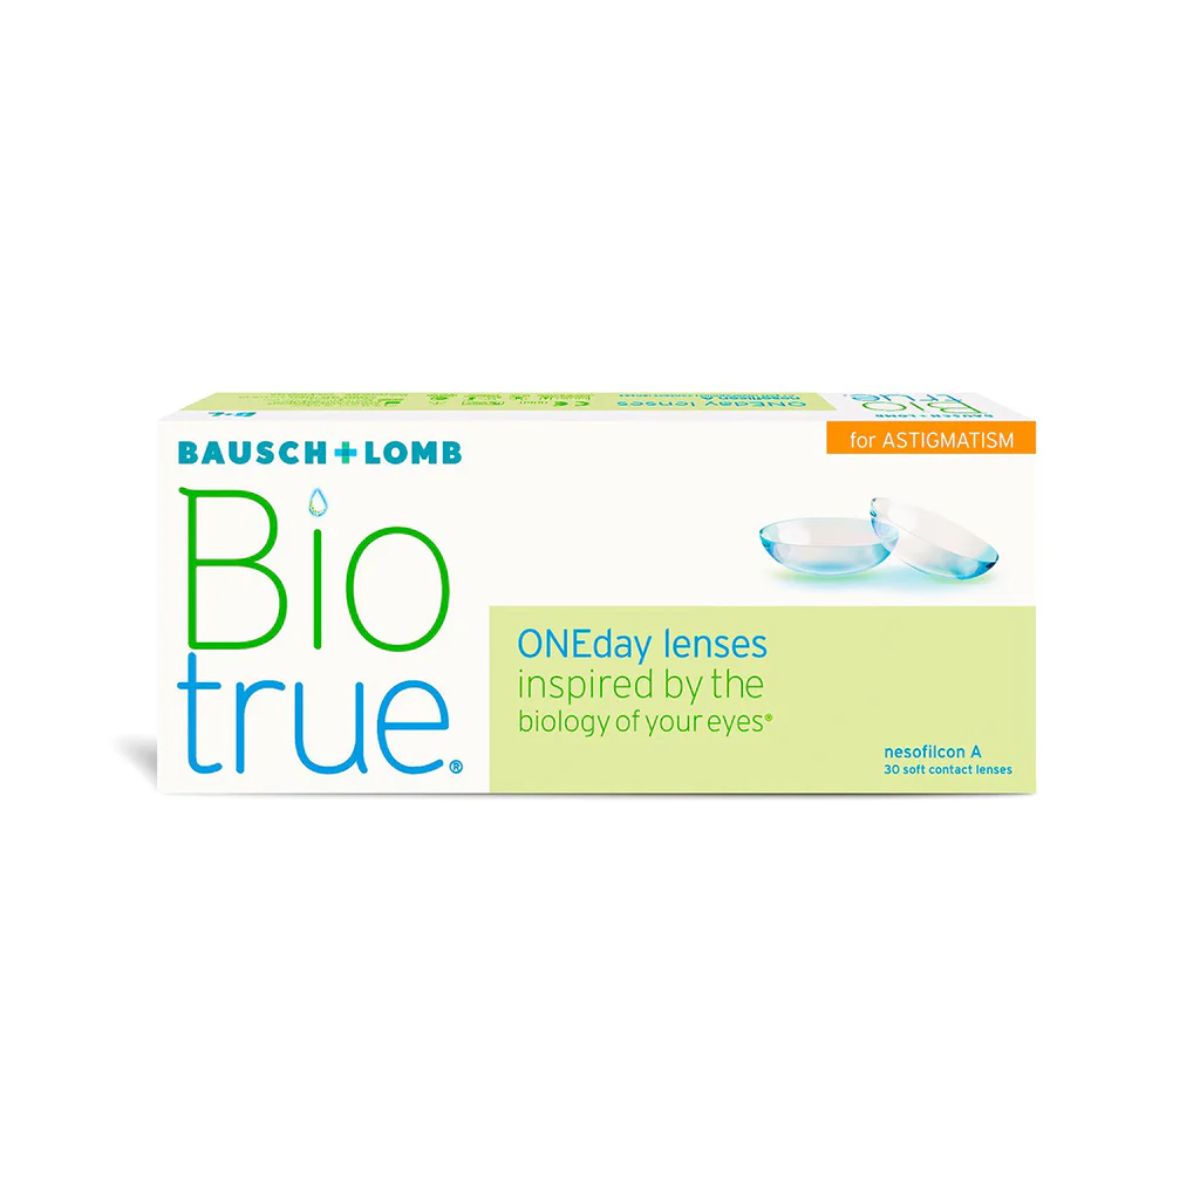 "Buy Bausch & Lomb Bio-True One Day For Astigmatism Contact Lenses"